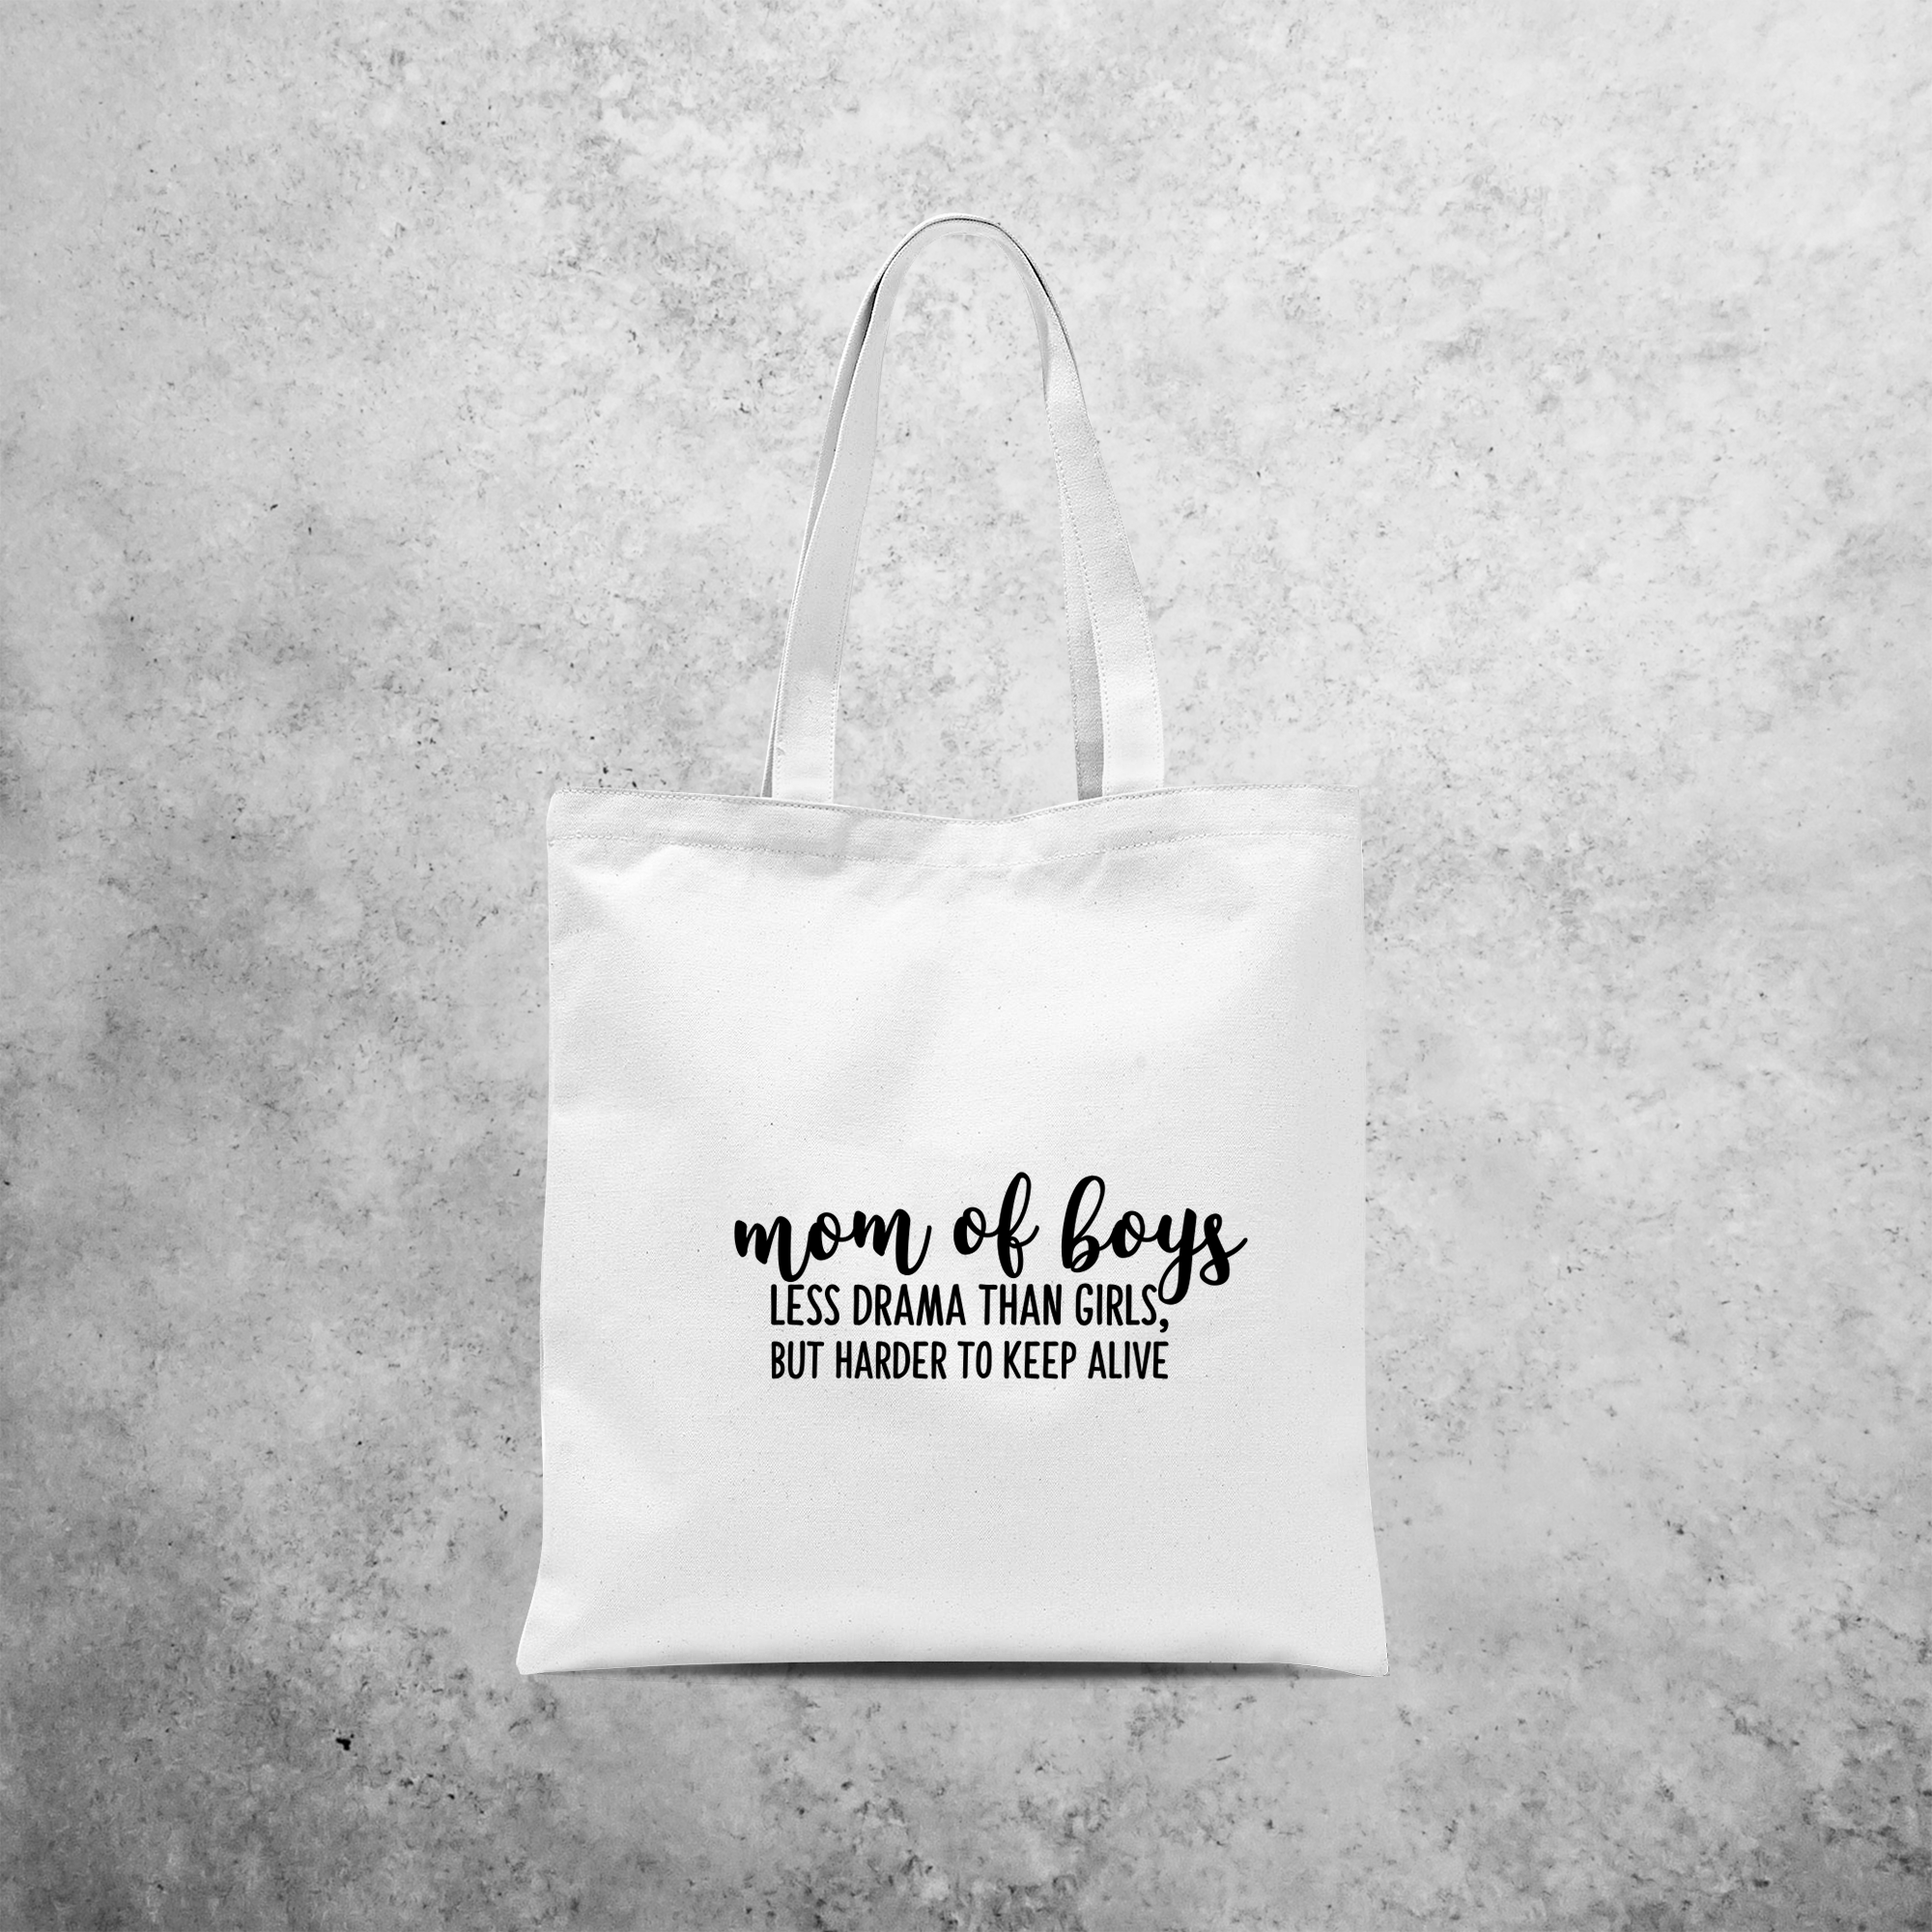 'Mom of boys - Less drama than girls, but harder to keep alive' tote bag